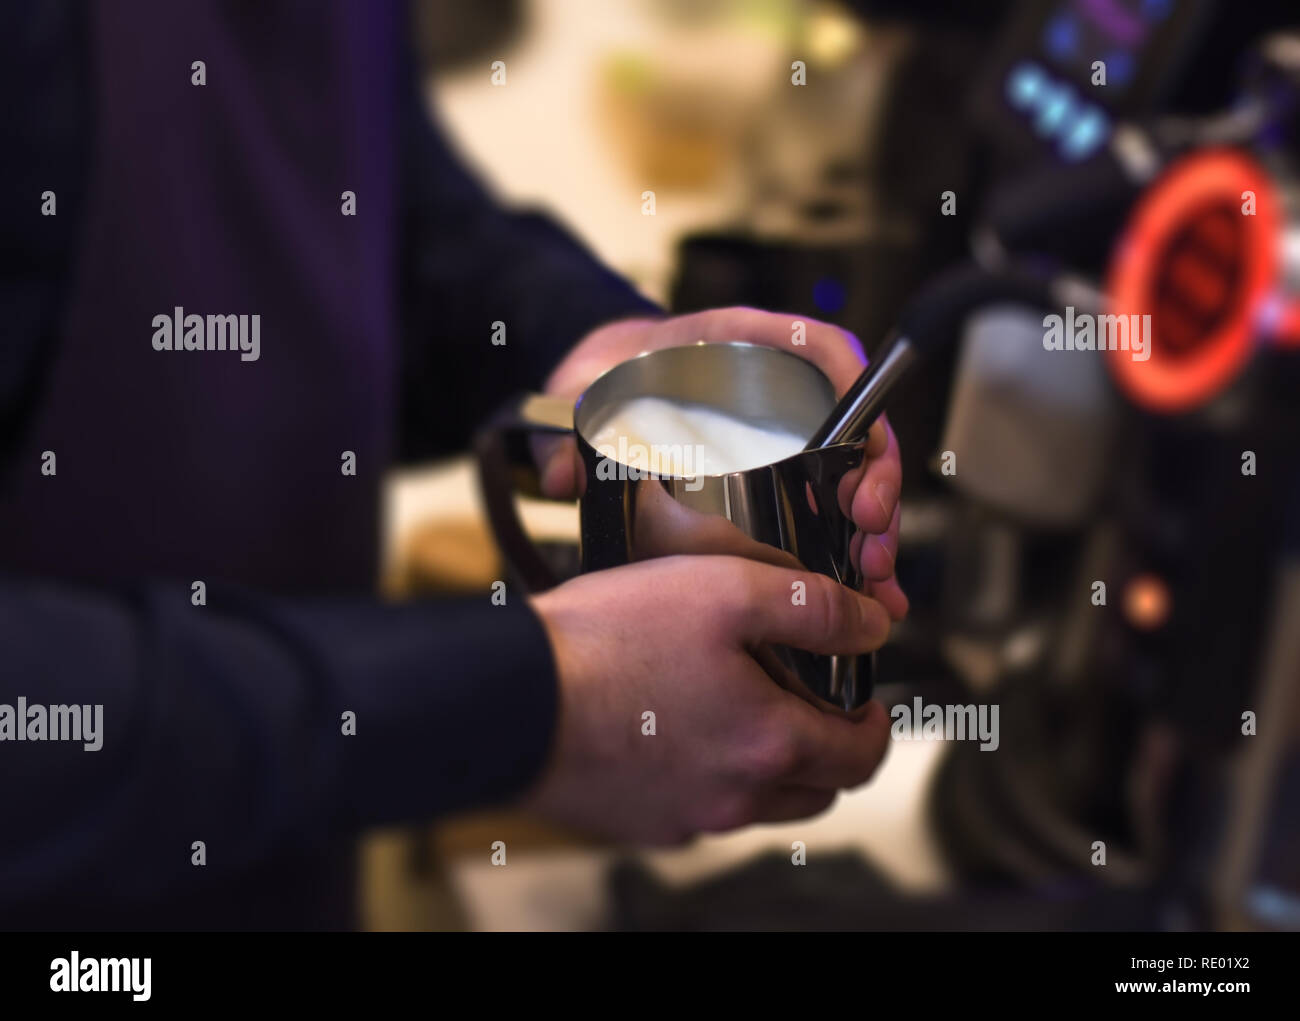 Steaming milk barista making beautiful creamy millk for perfect cup of espresso Stock Photo